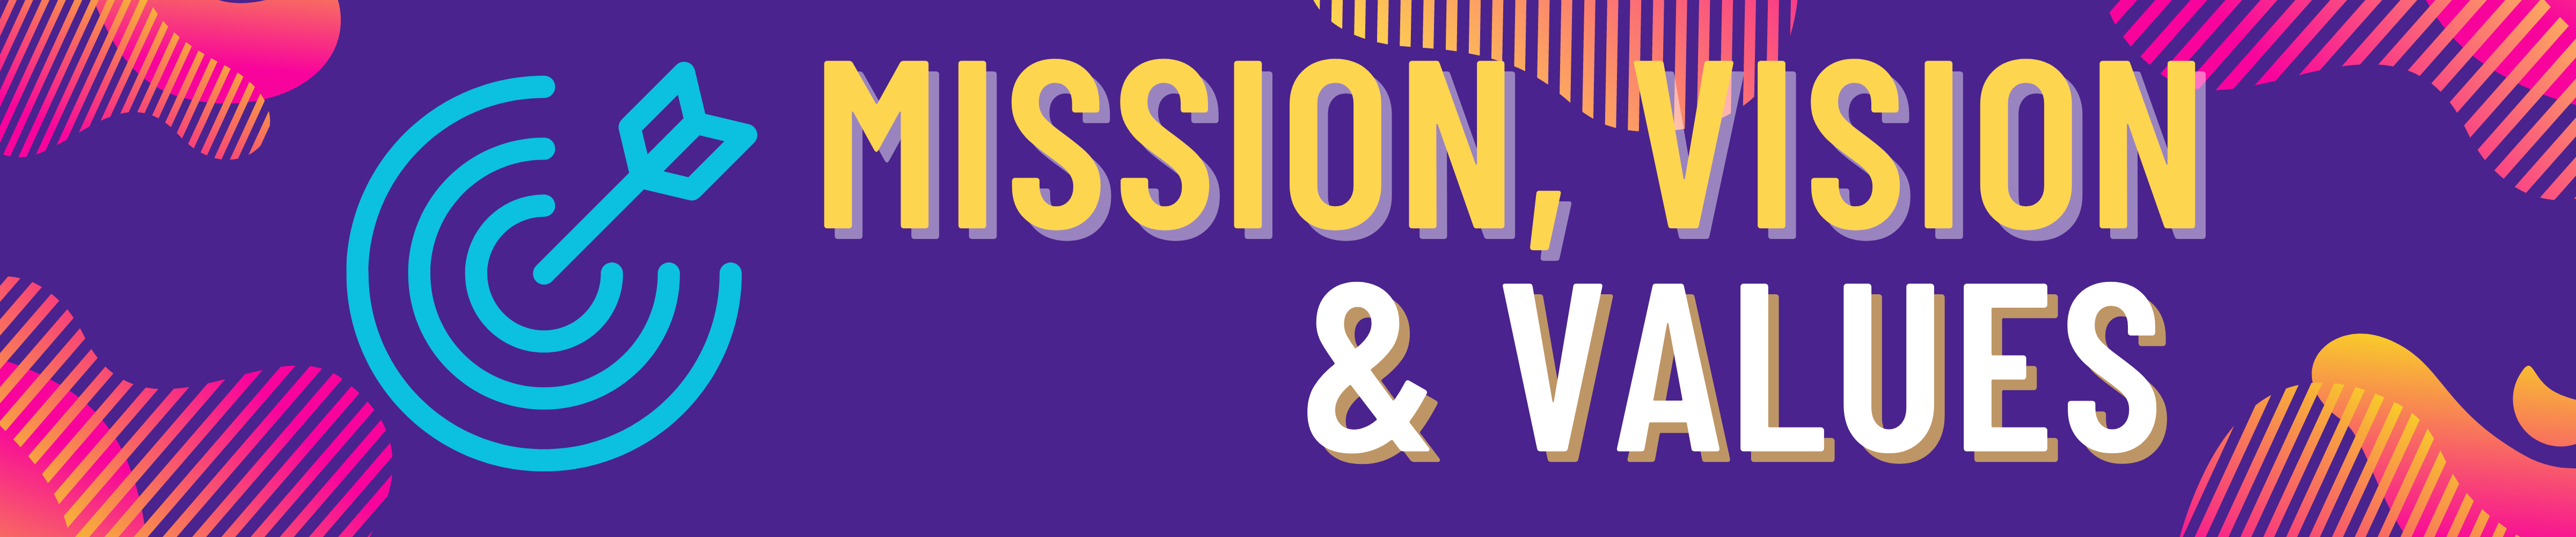 A digital banner with a dark purple background has bright blob shapes in the corners that fade from fuchsia to gold. The header reads Mission, Vision, & Values. To the left of the letters a turquoise icon of a target with an arrow hitting the bullseye.